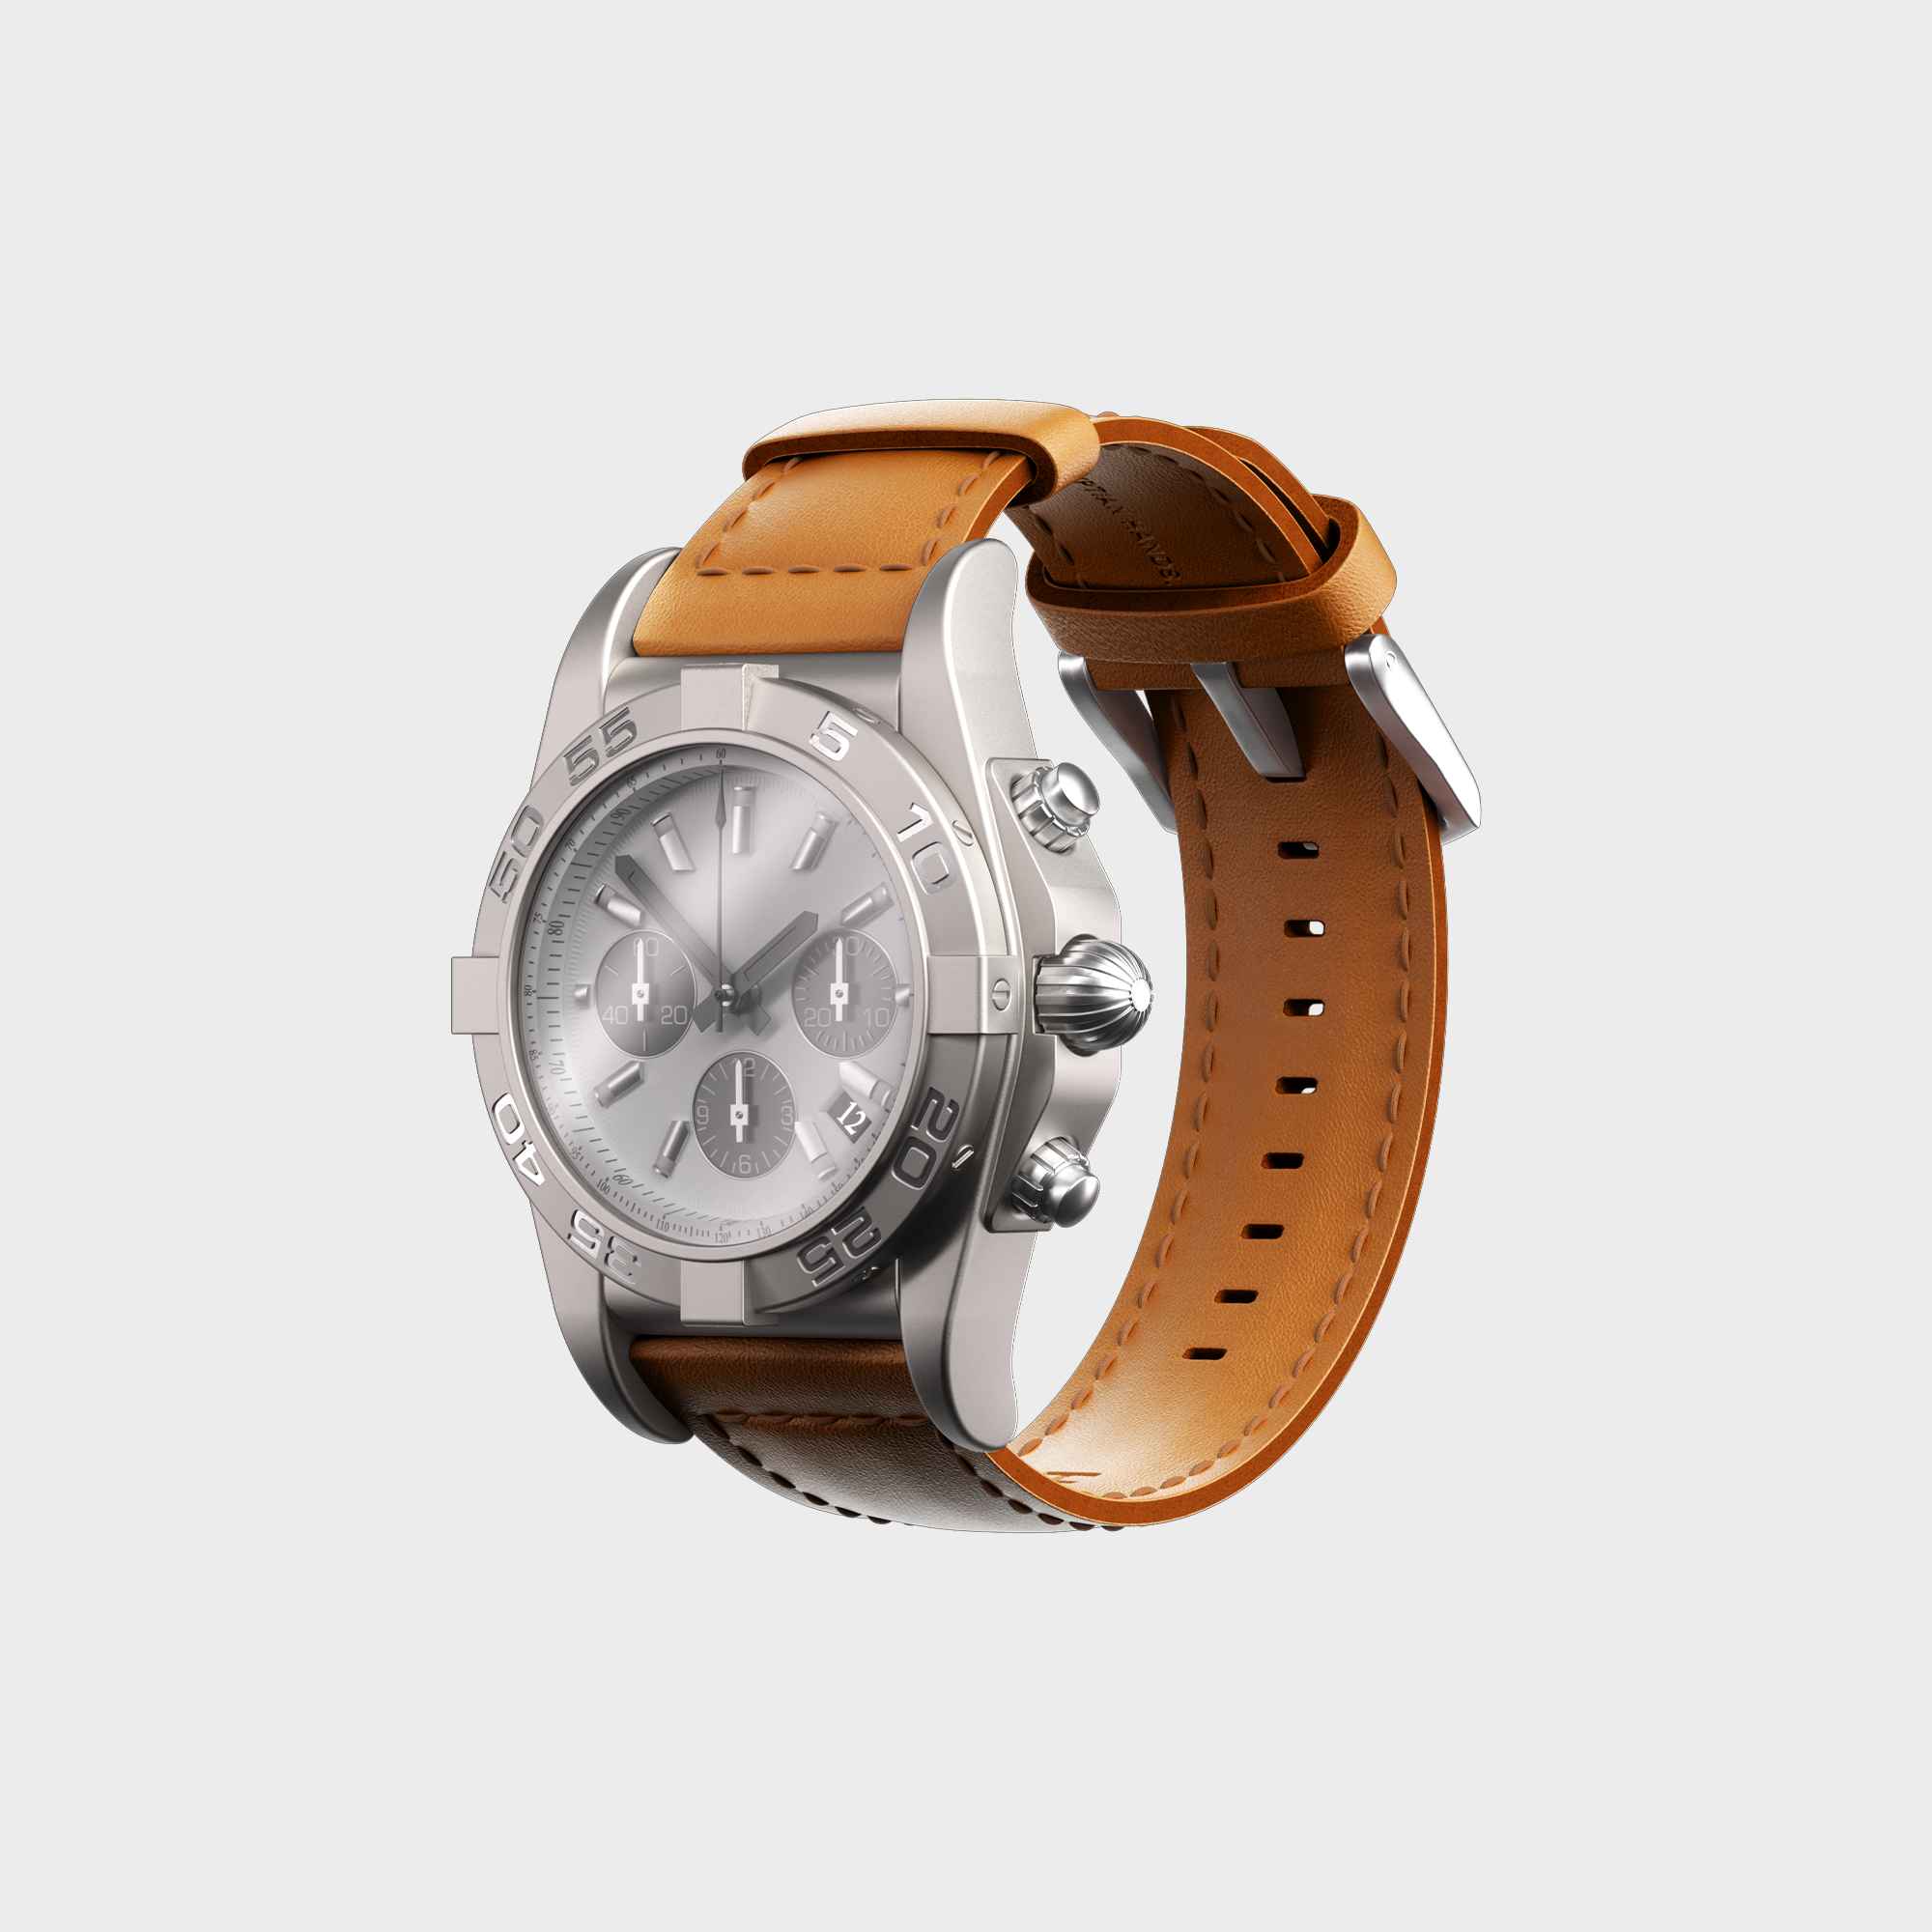 Luxury stainless steel chronograph watch with tan leather strap on a white background.